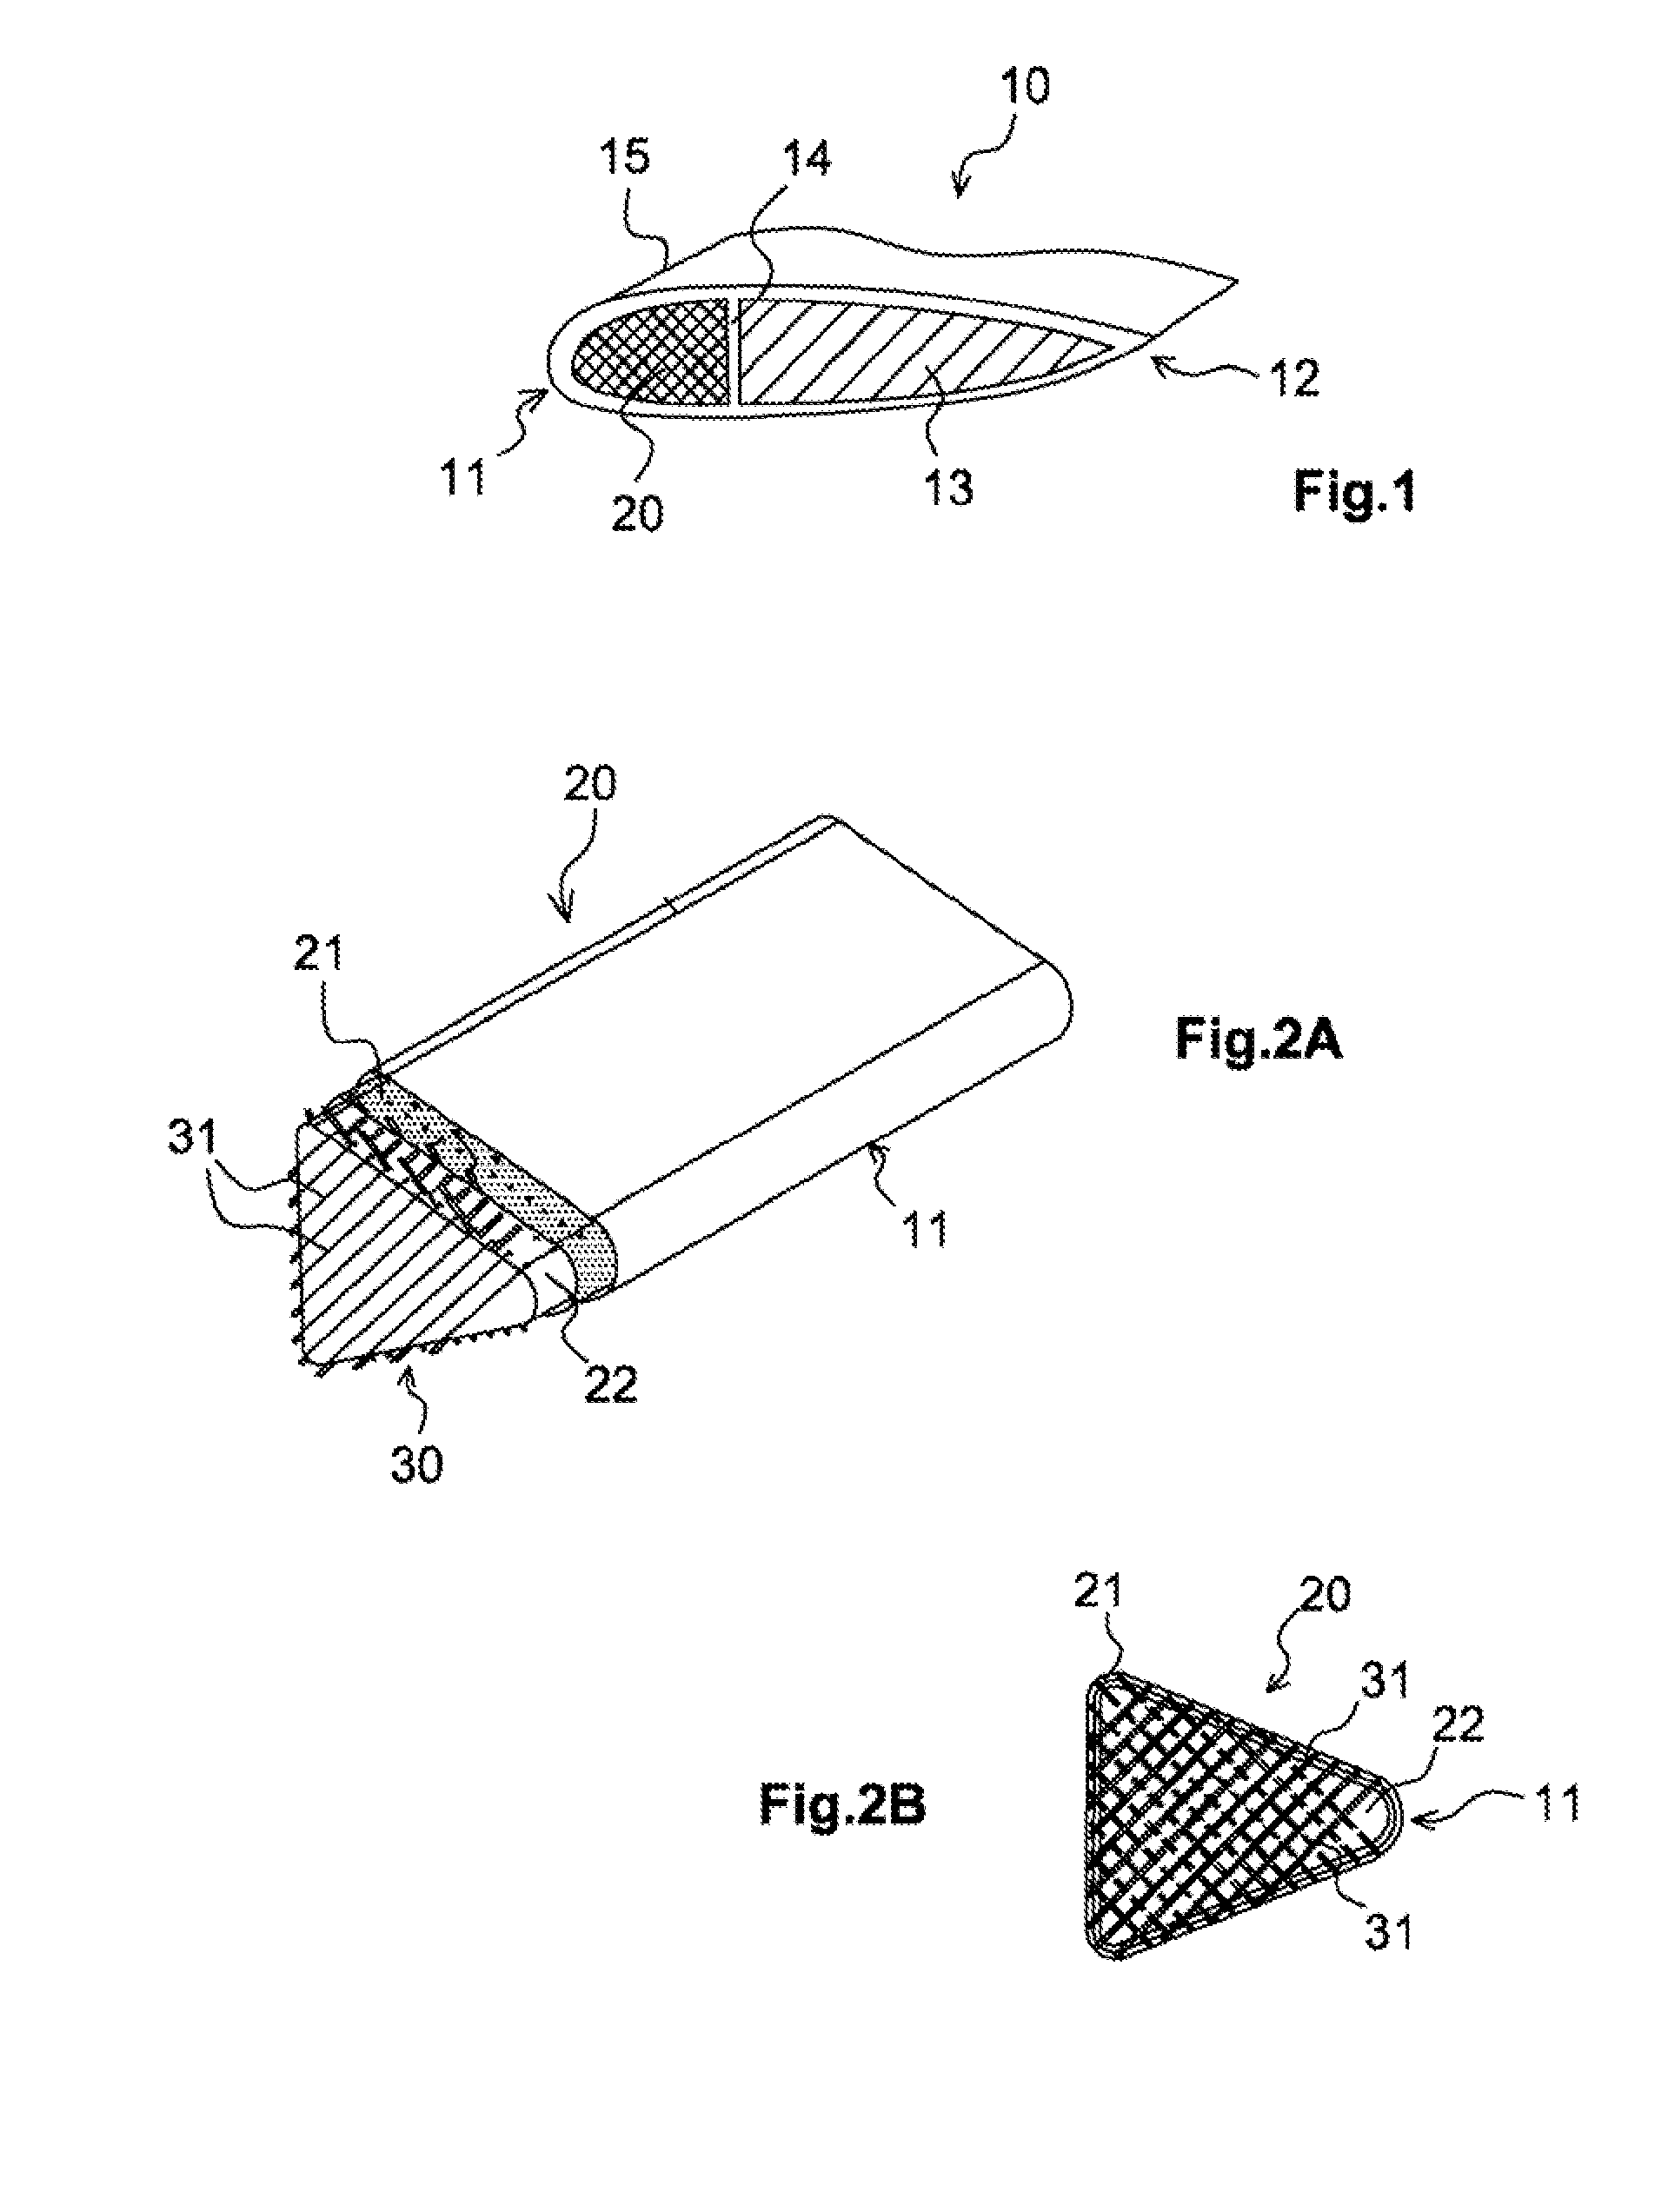 Energy absorption device for aircraft structural element